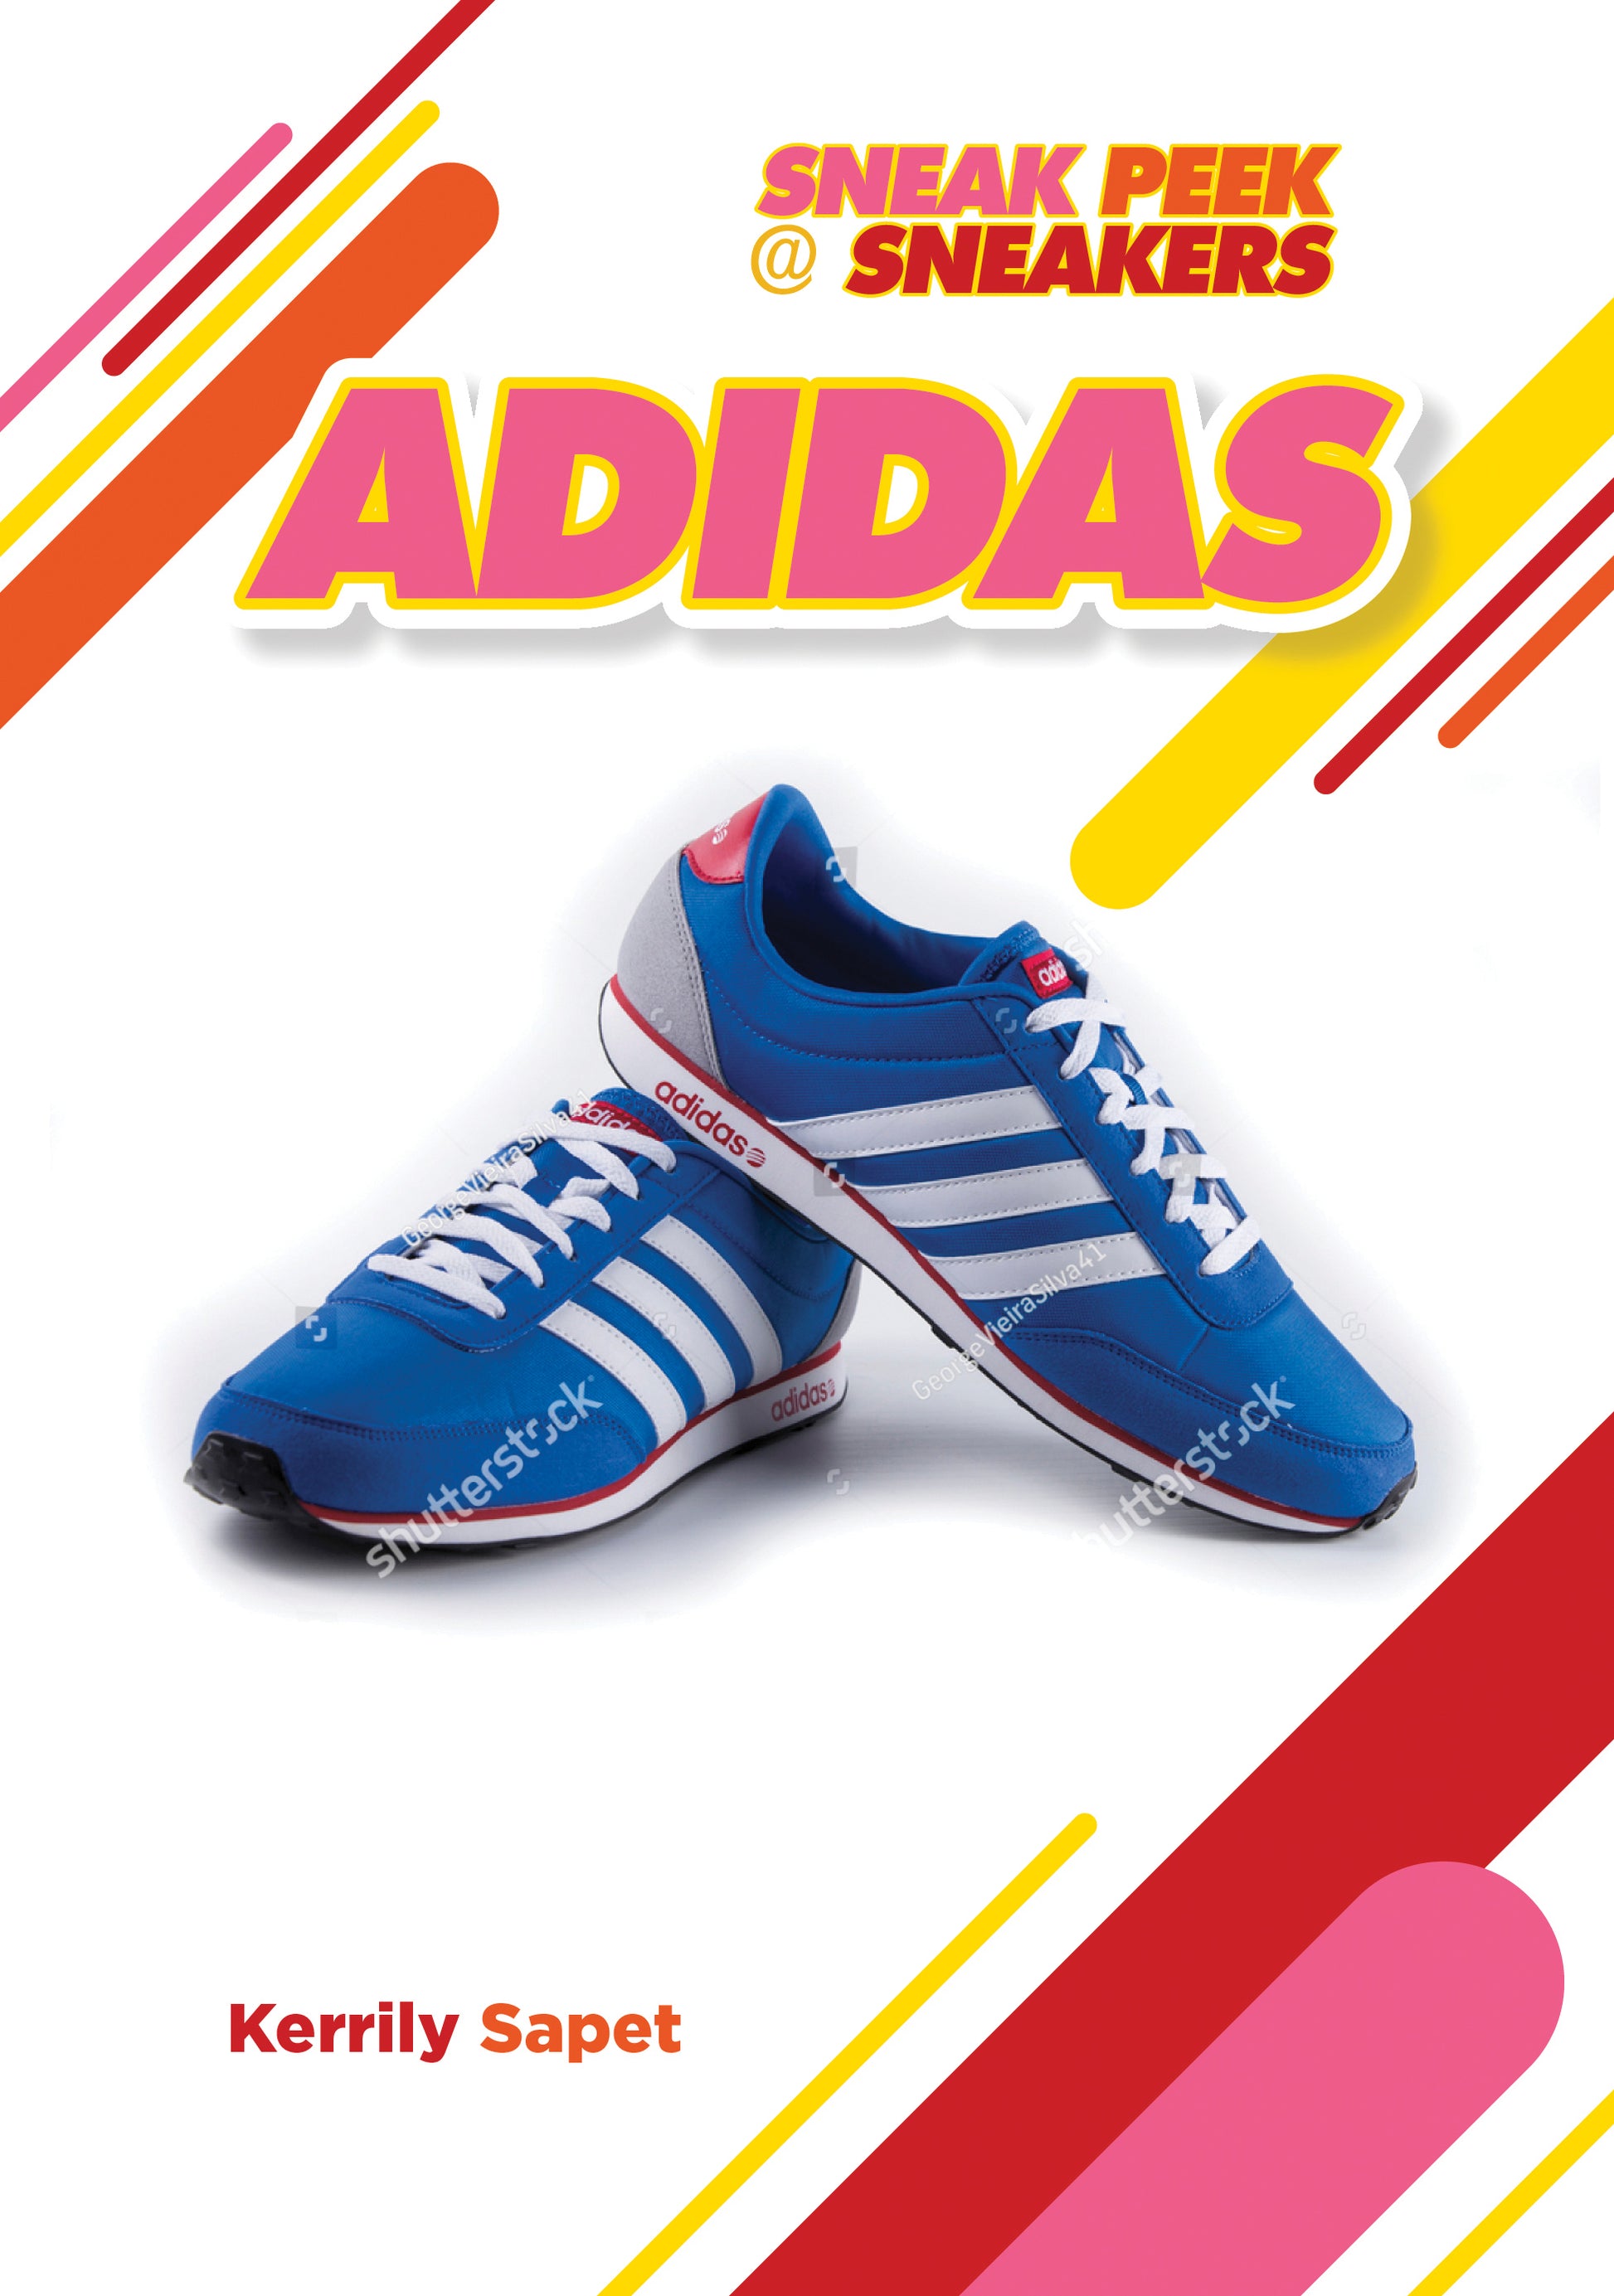 In 1924, Adi and Rudolf started a shoe company in their mother's laundry room. They one day divide that company into Adidas and Puma. Today, Adidas sells millions of sneakers